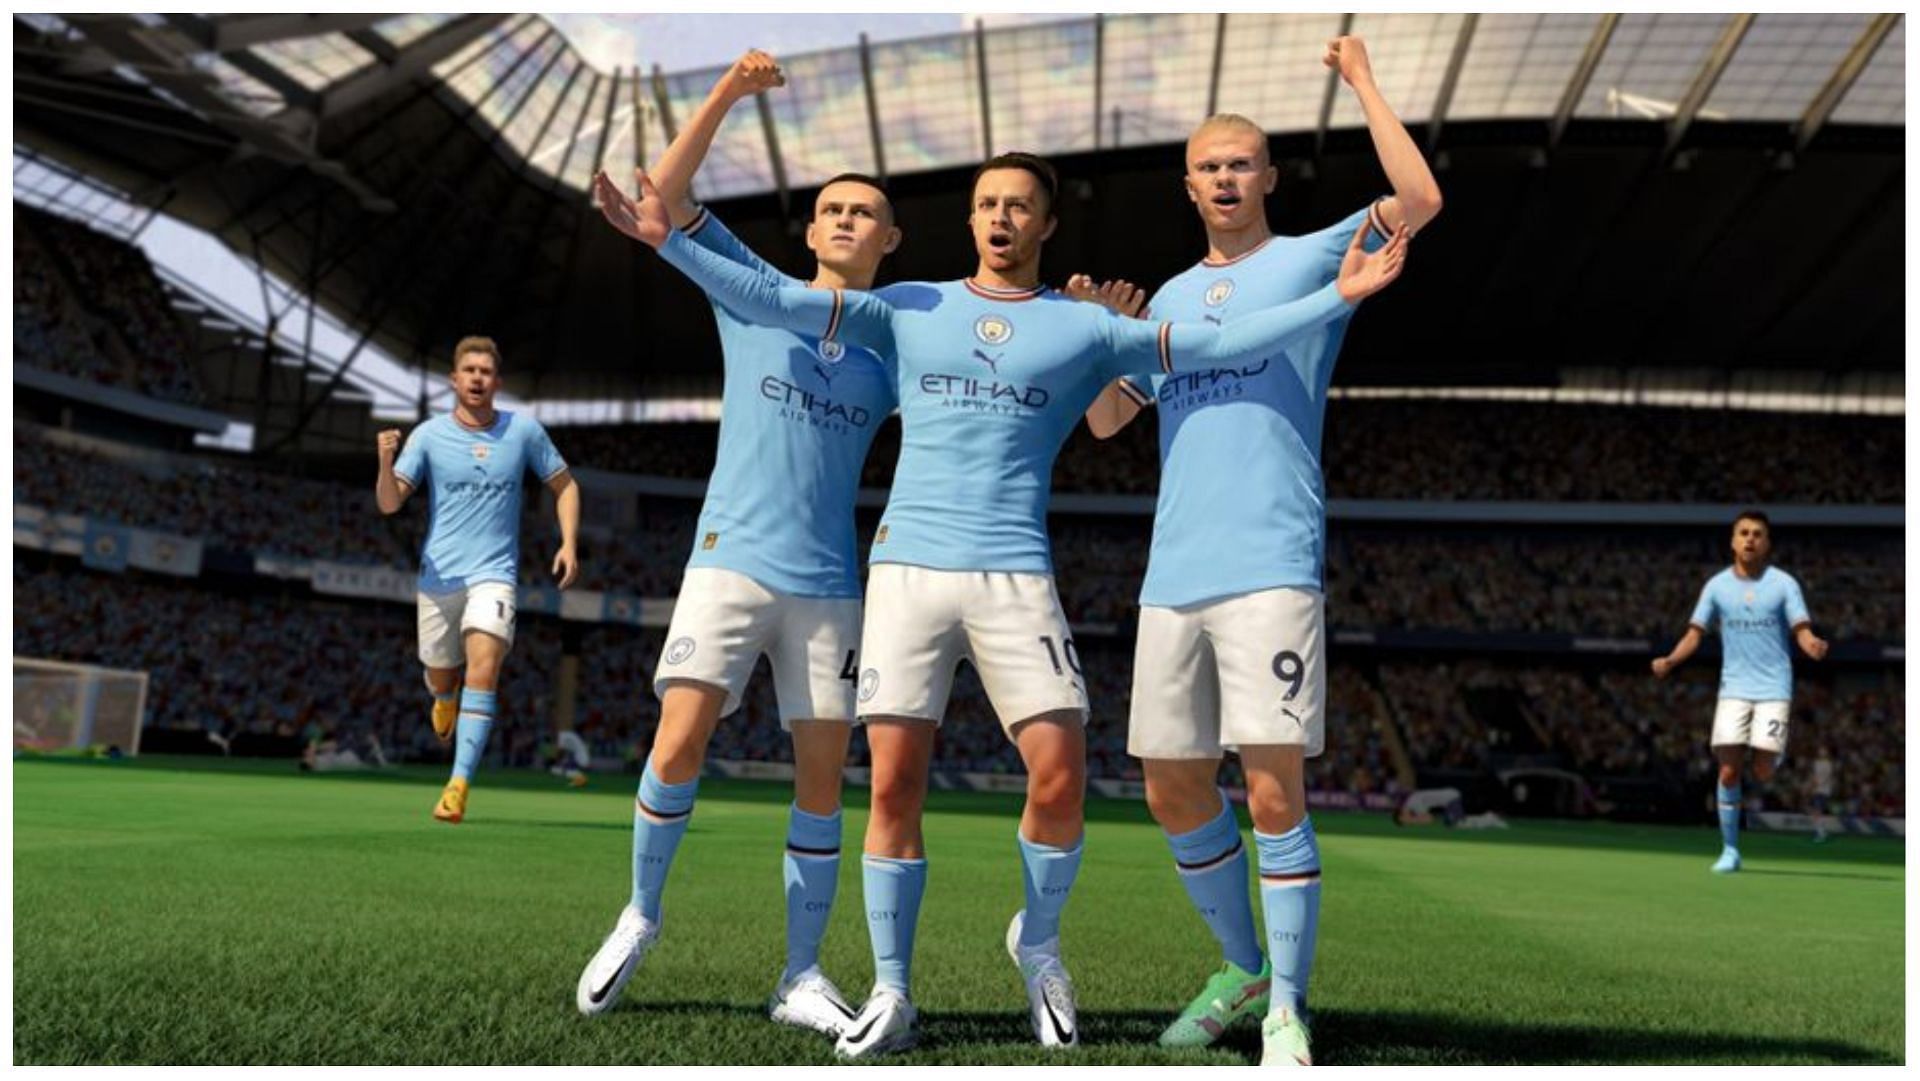 Manchester City have dominated the Premier League for years with their impressive lineup (Image via EA Sports)